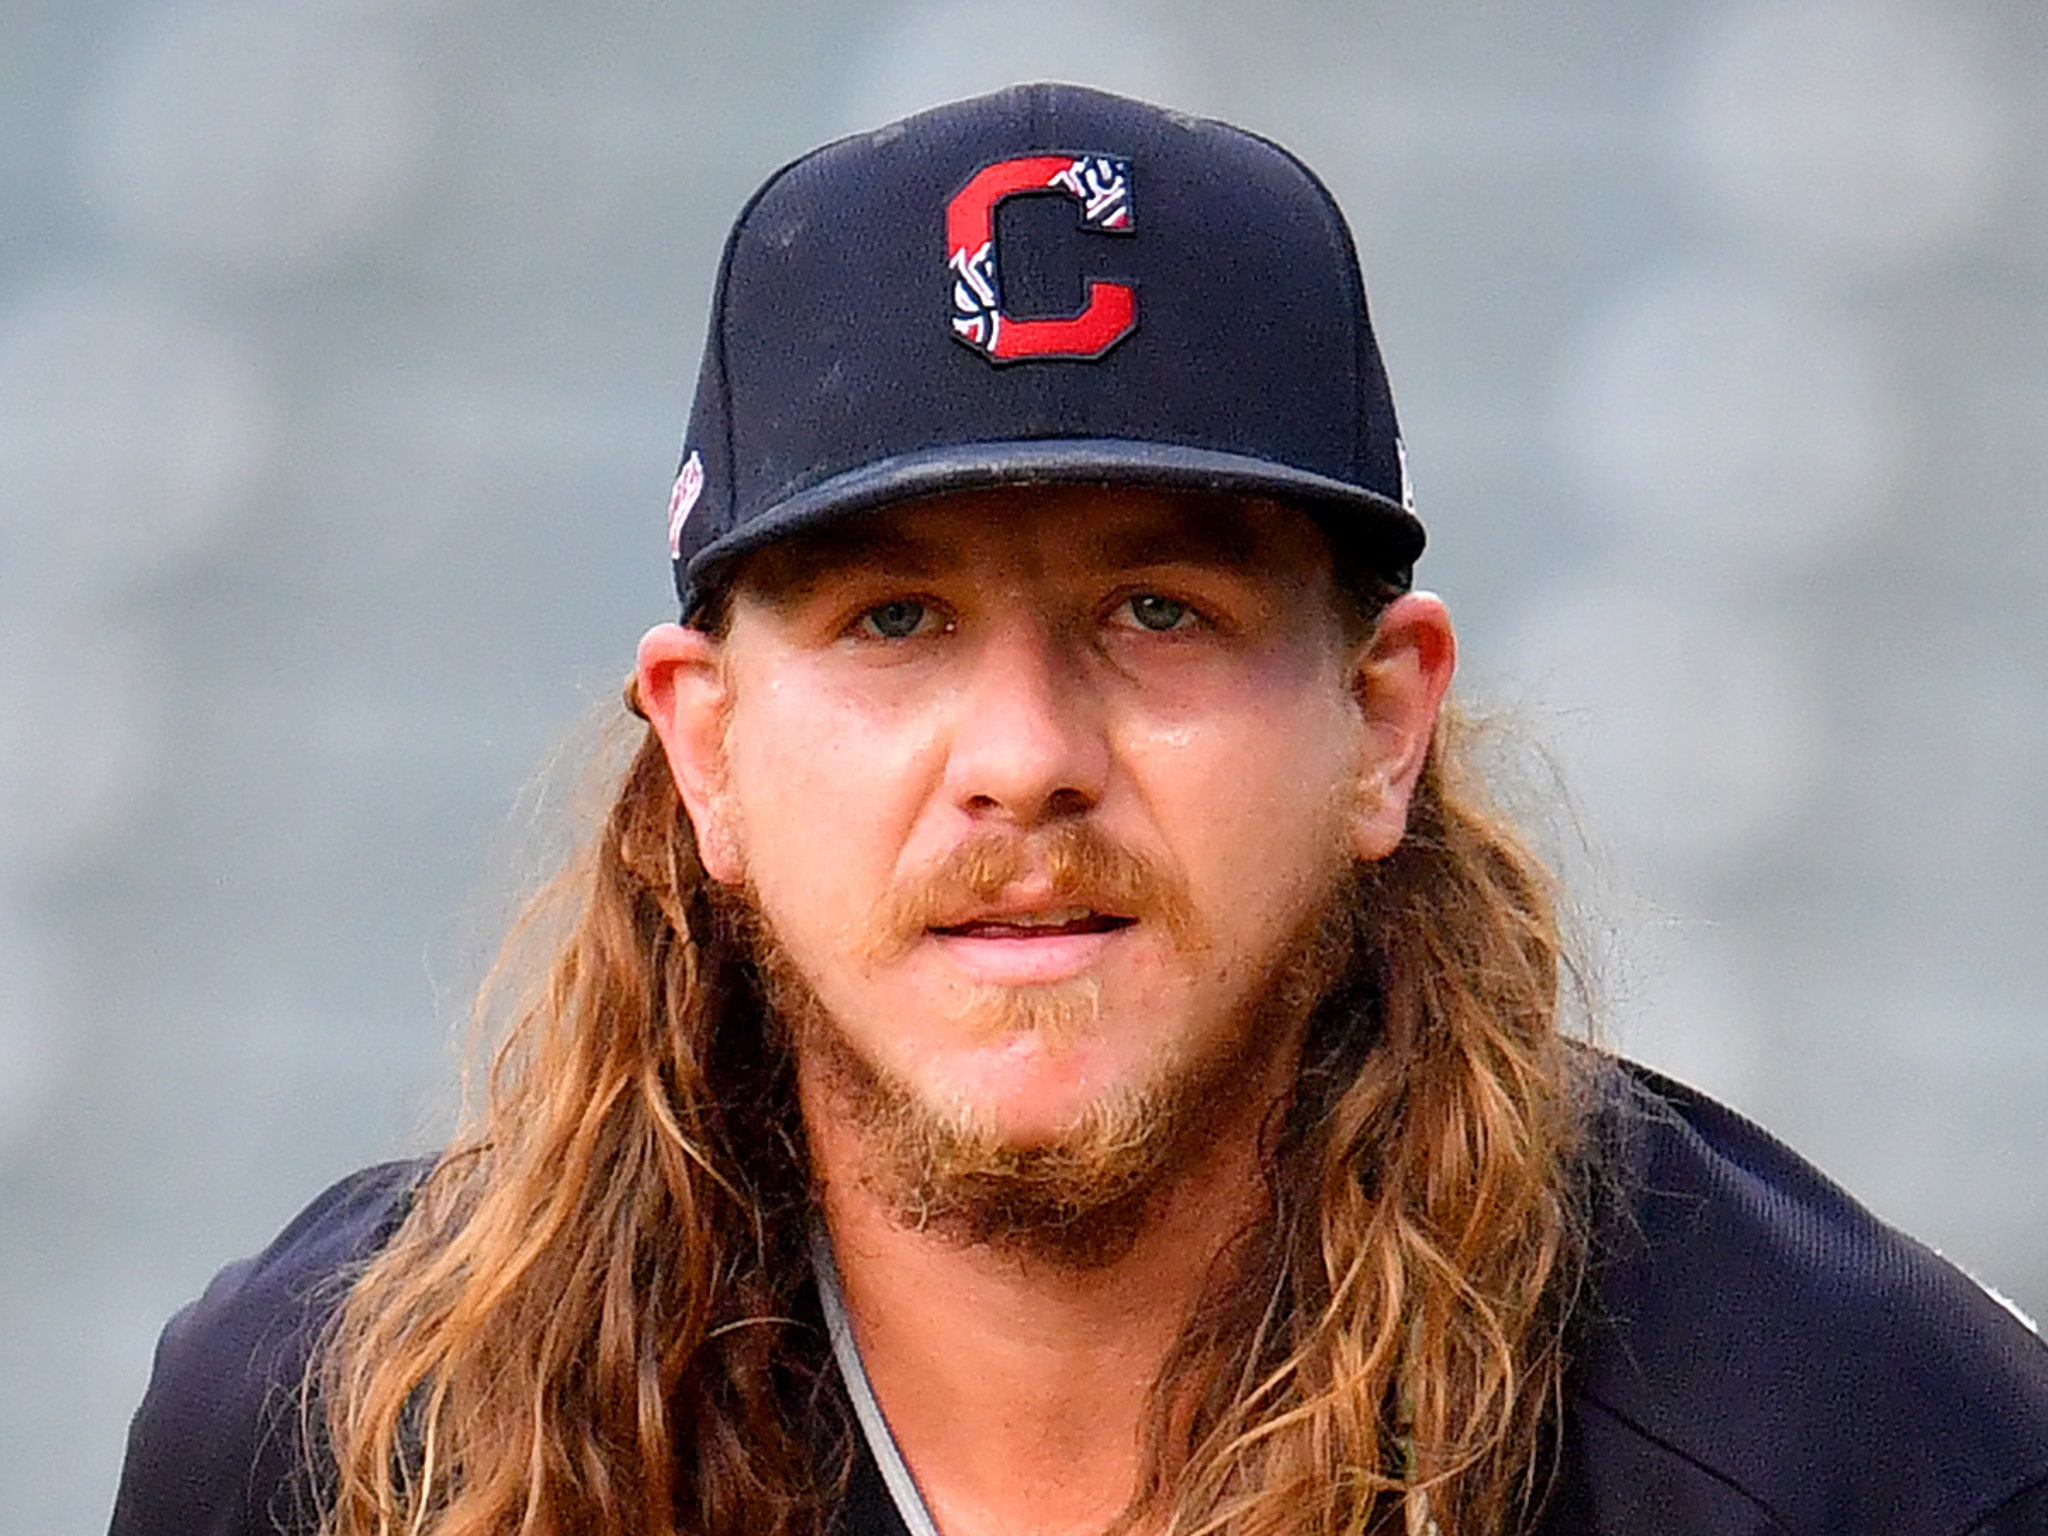 Mike Clevinger rocked a wild hairstyle during latest start